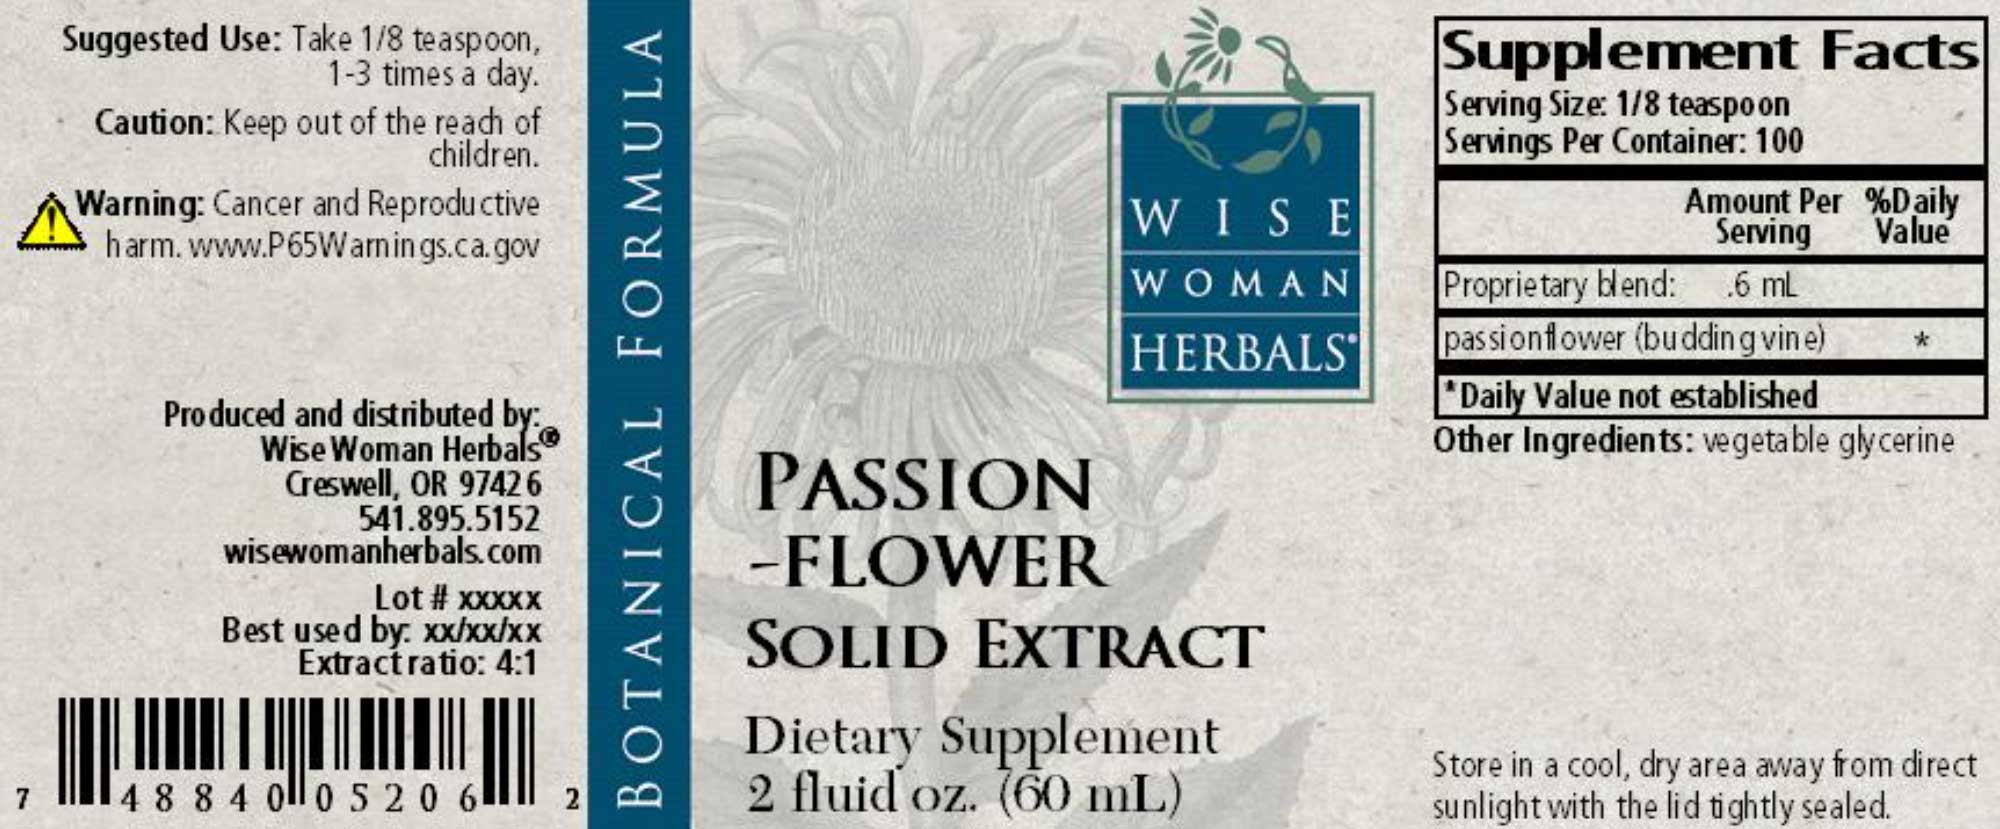 Wise Woman Herbals Passionflower Solid Extract Label